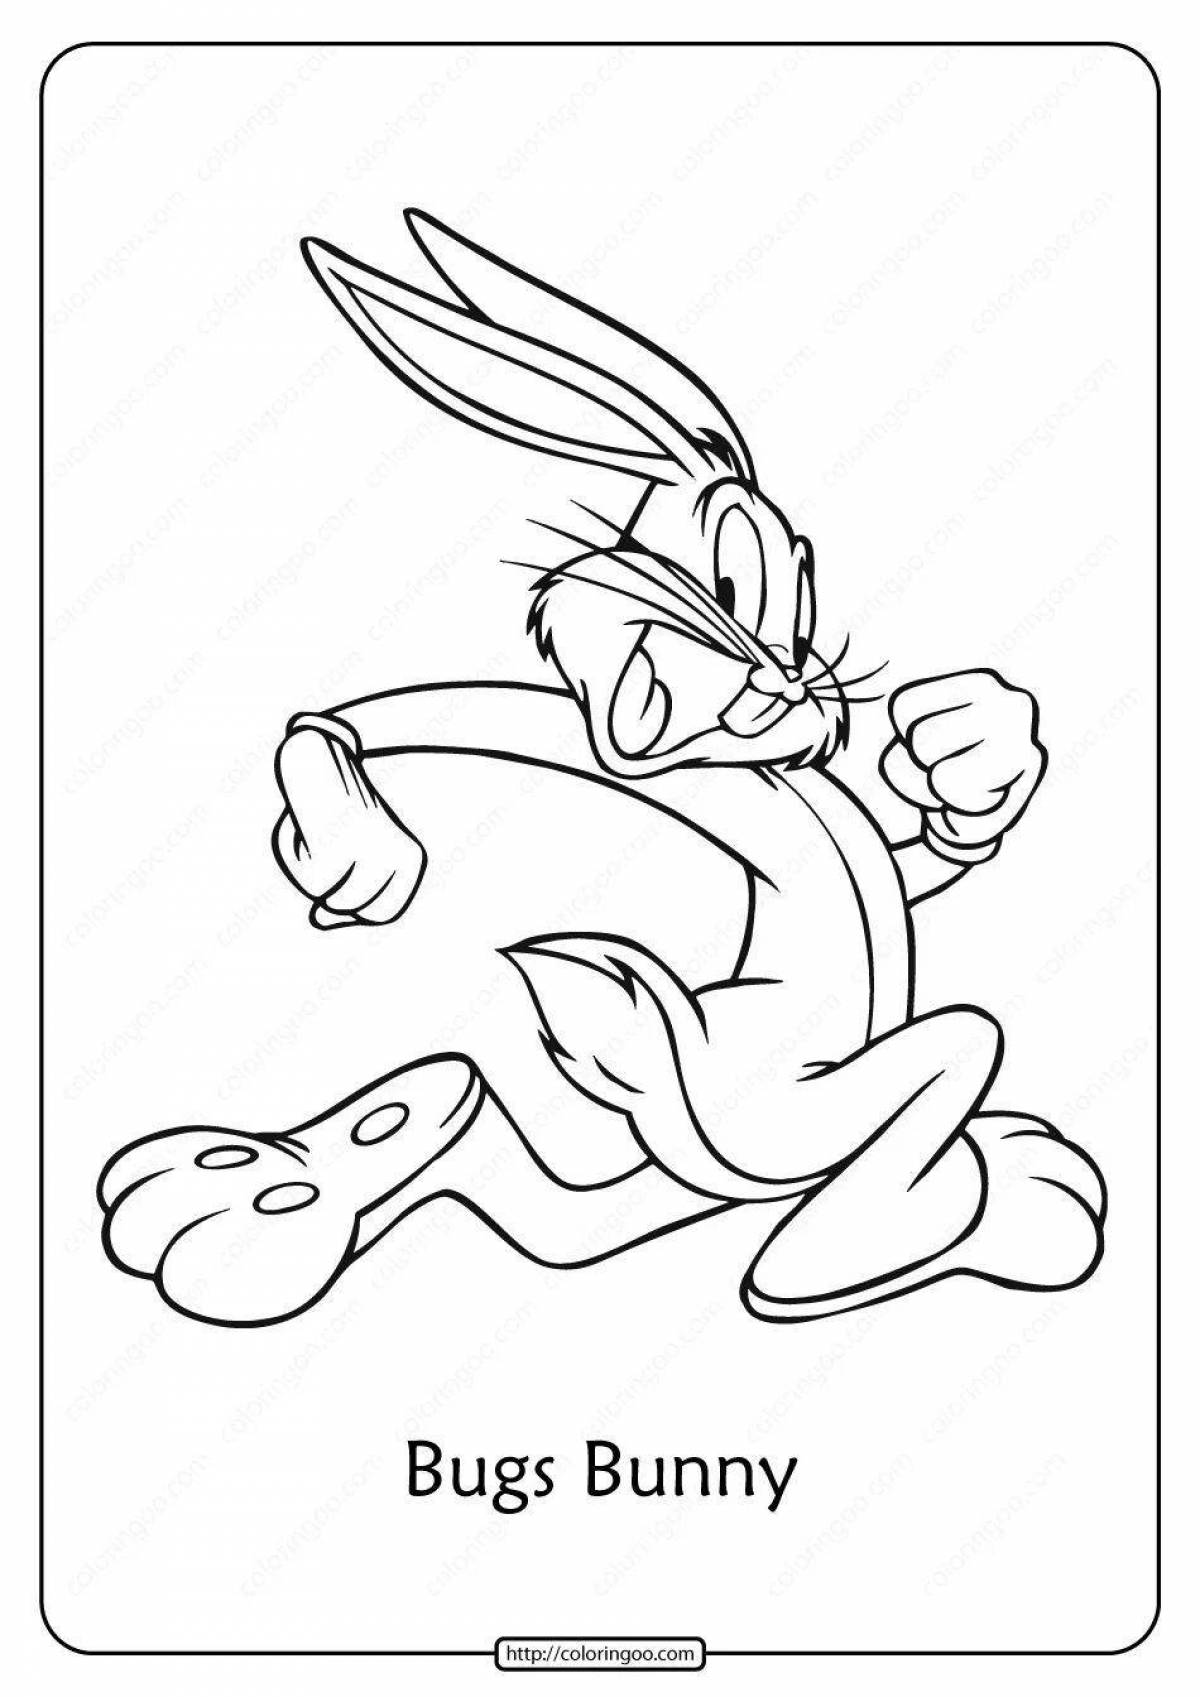 Adorable running hare coloring page